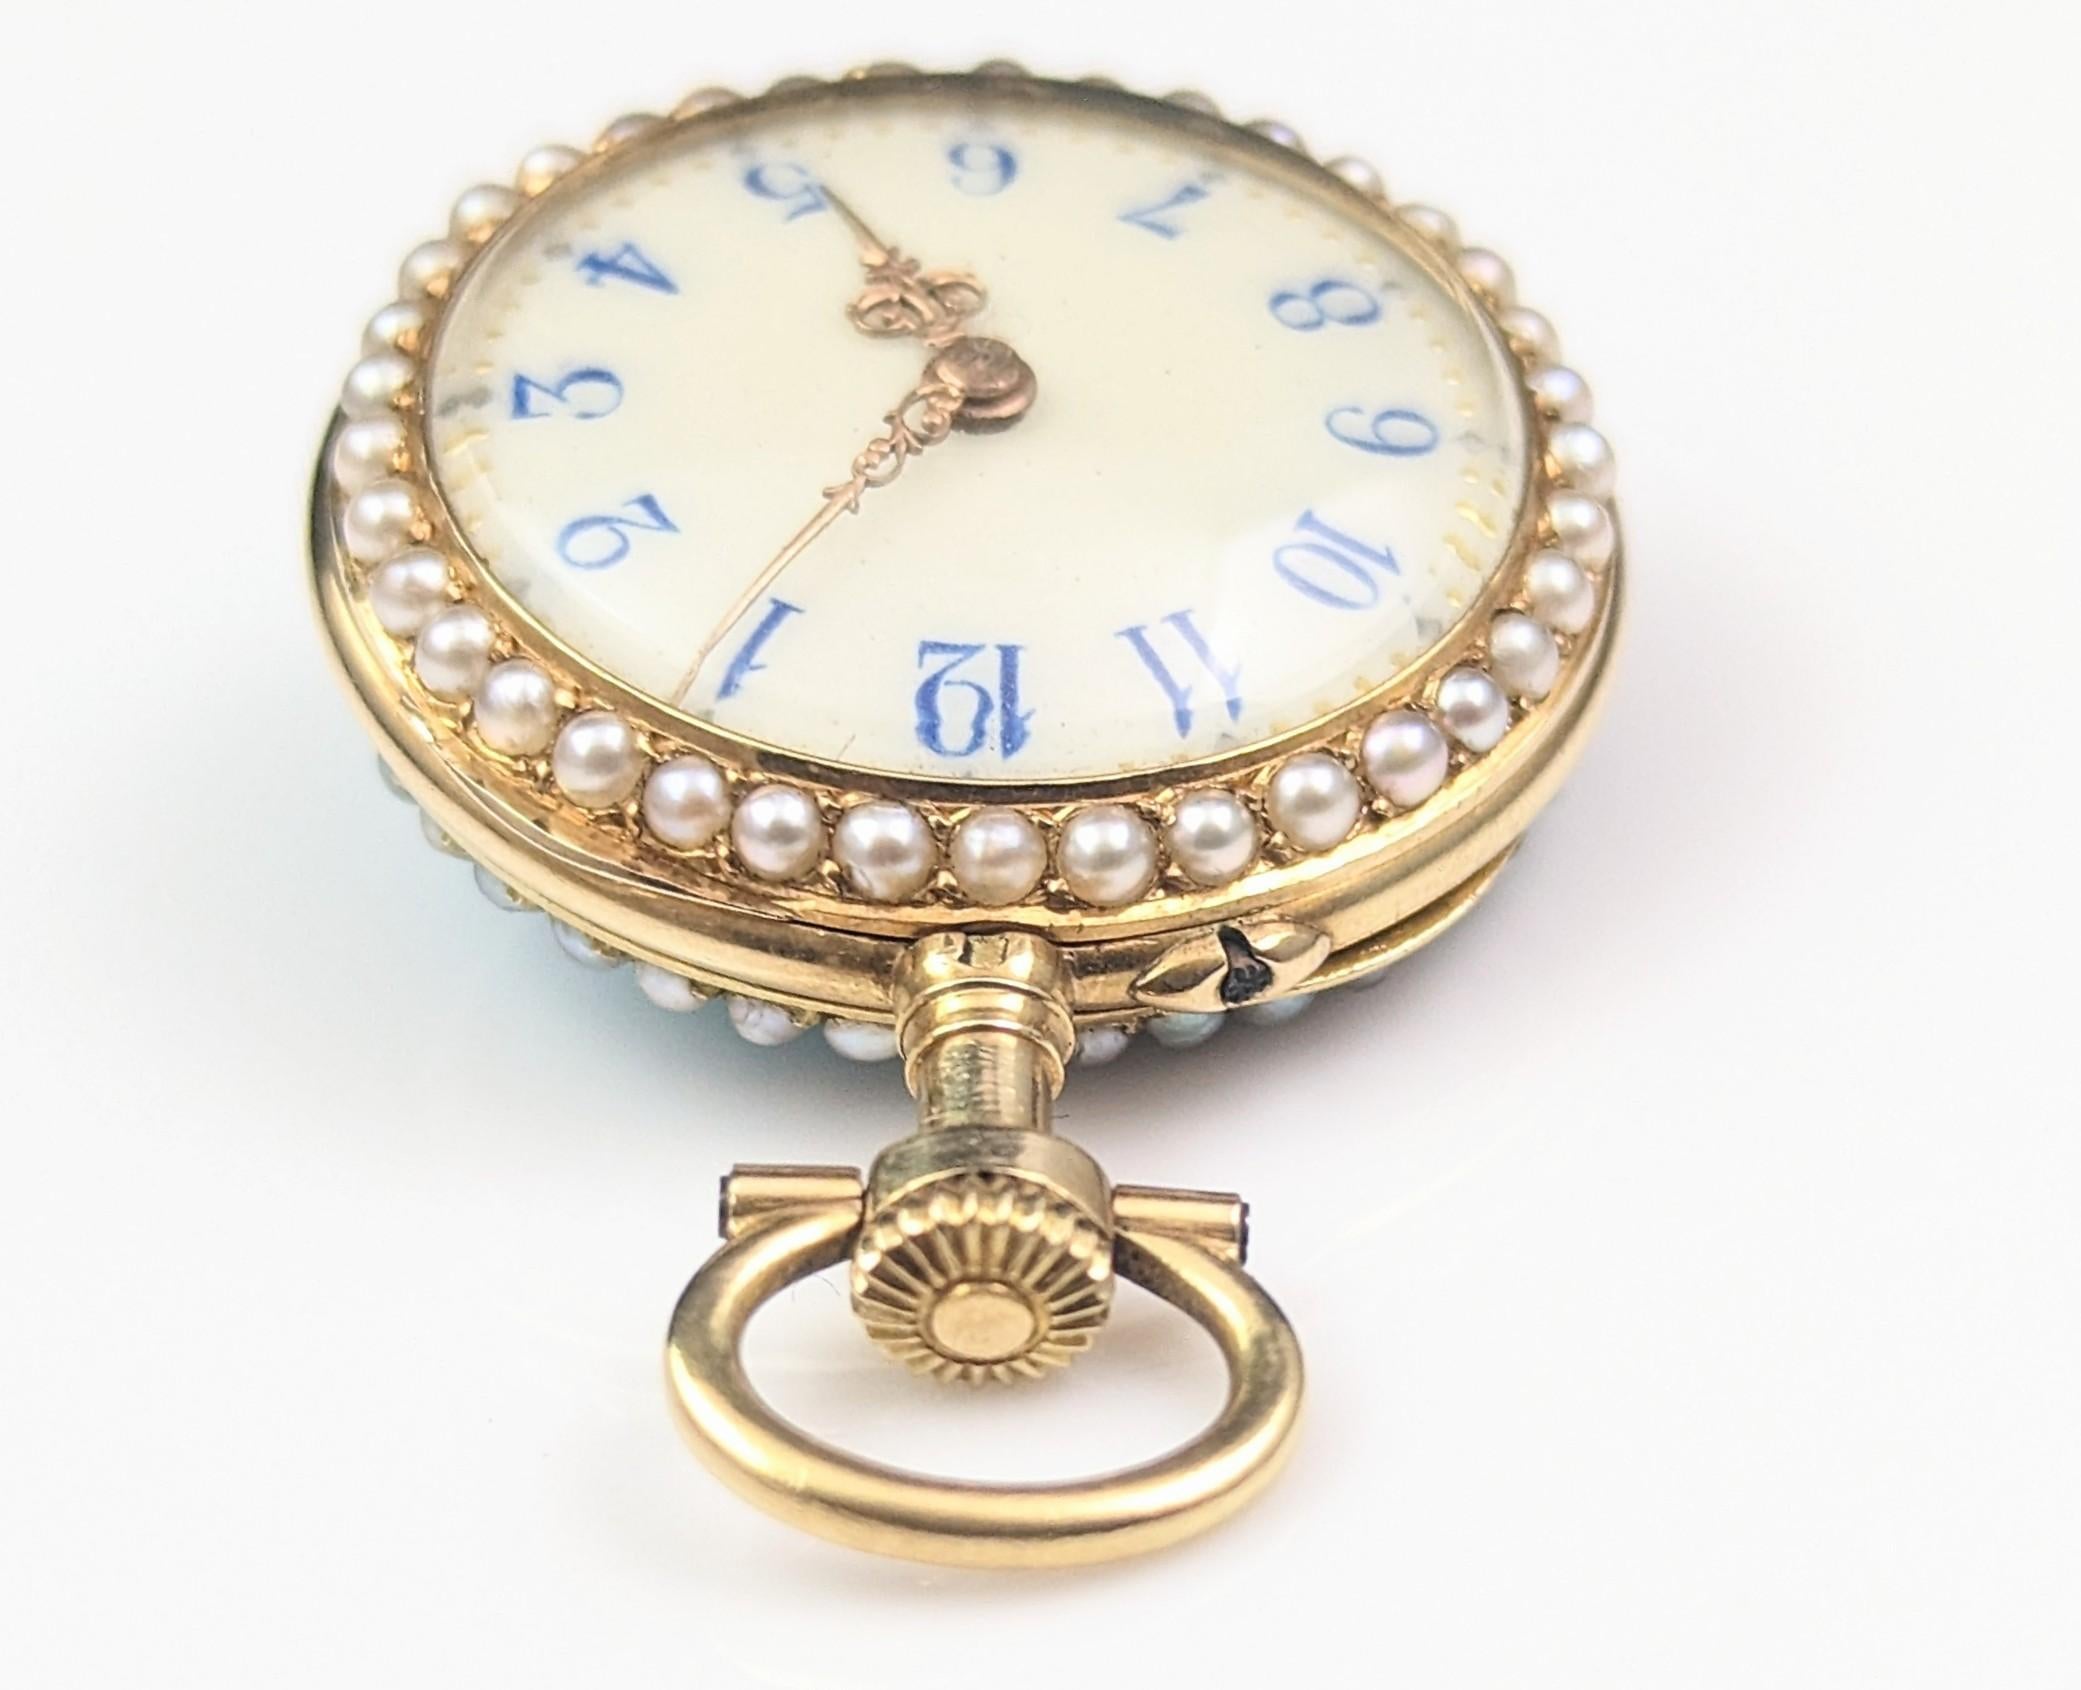 Antique Diamond and Pearl Fob Watch, 18 Karat Gold, Guilloche Enamel 7